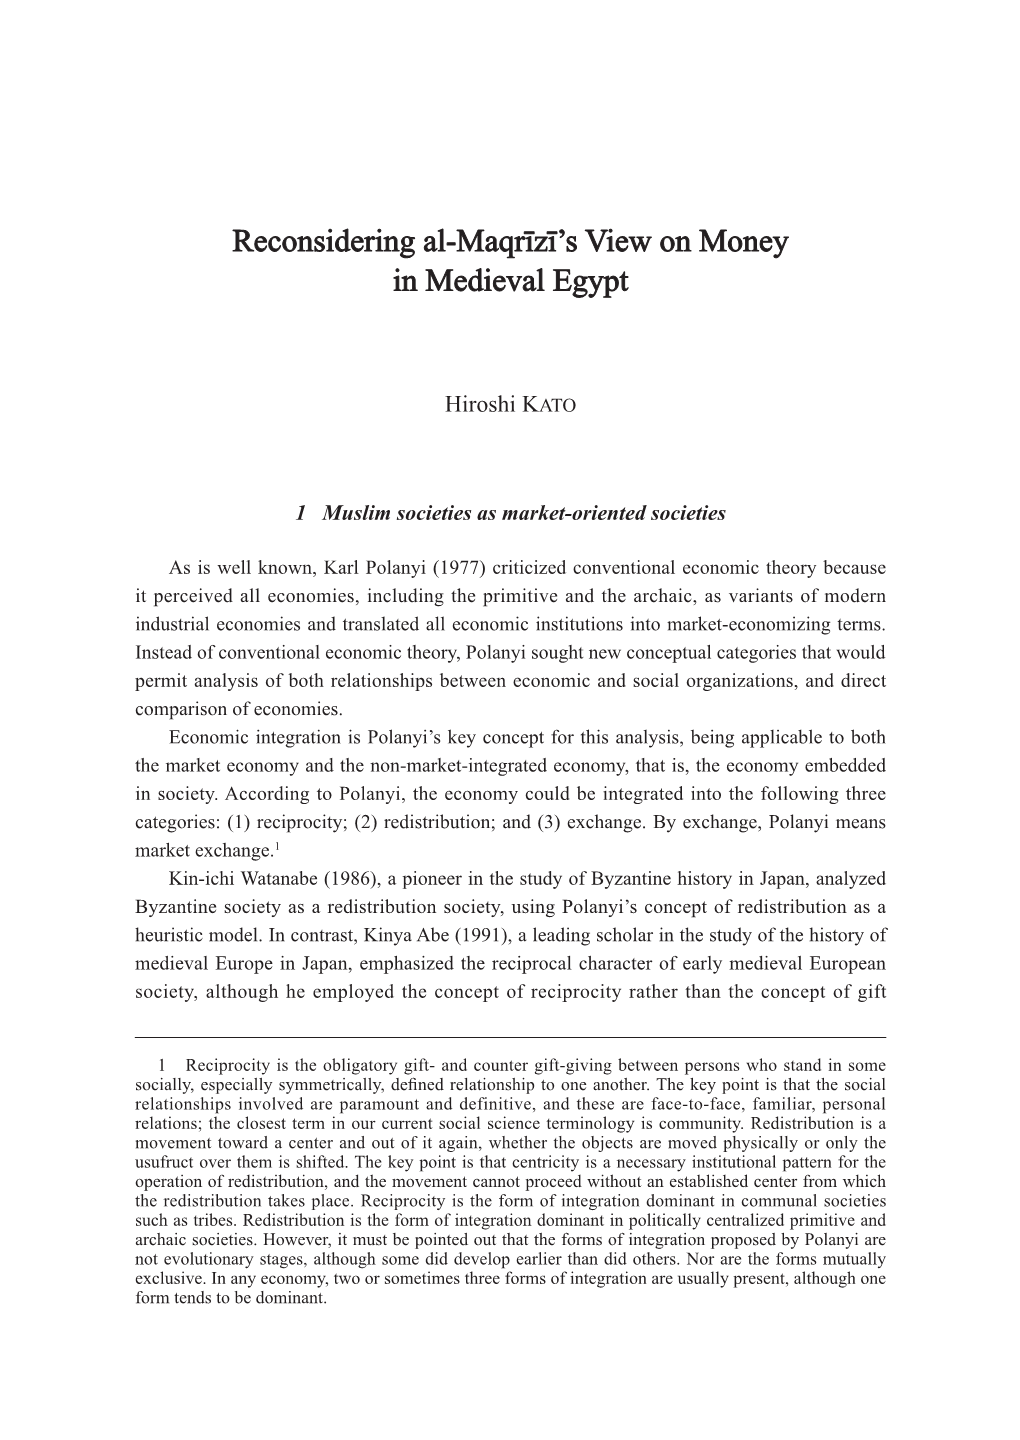 Reconsidering Al-Maqrīzī's View on Money in Medieval Egypt